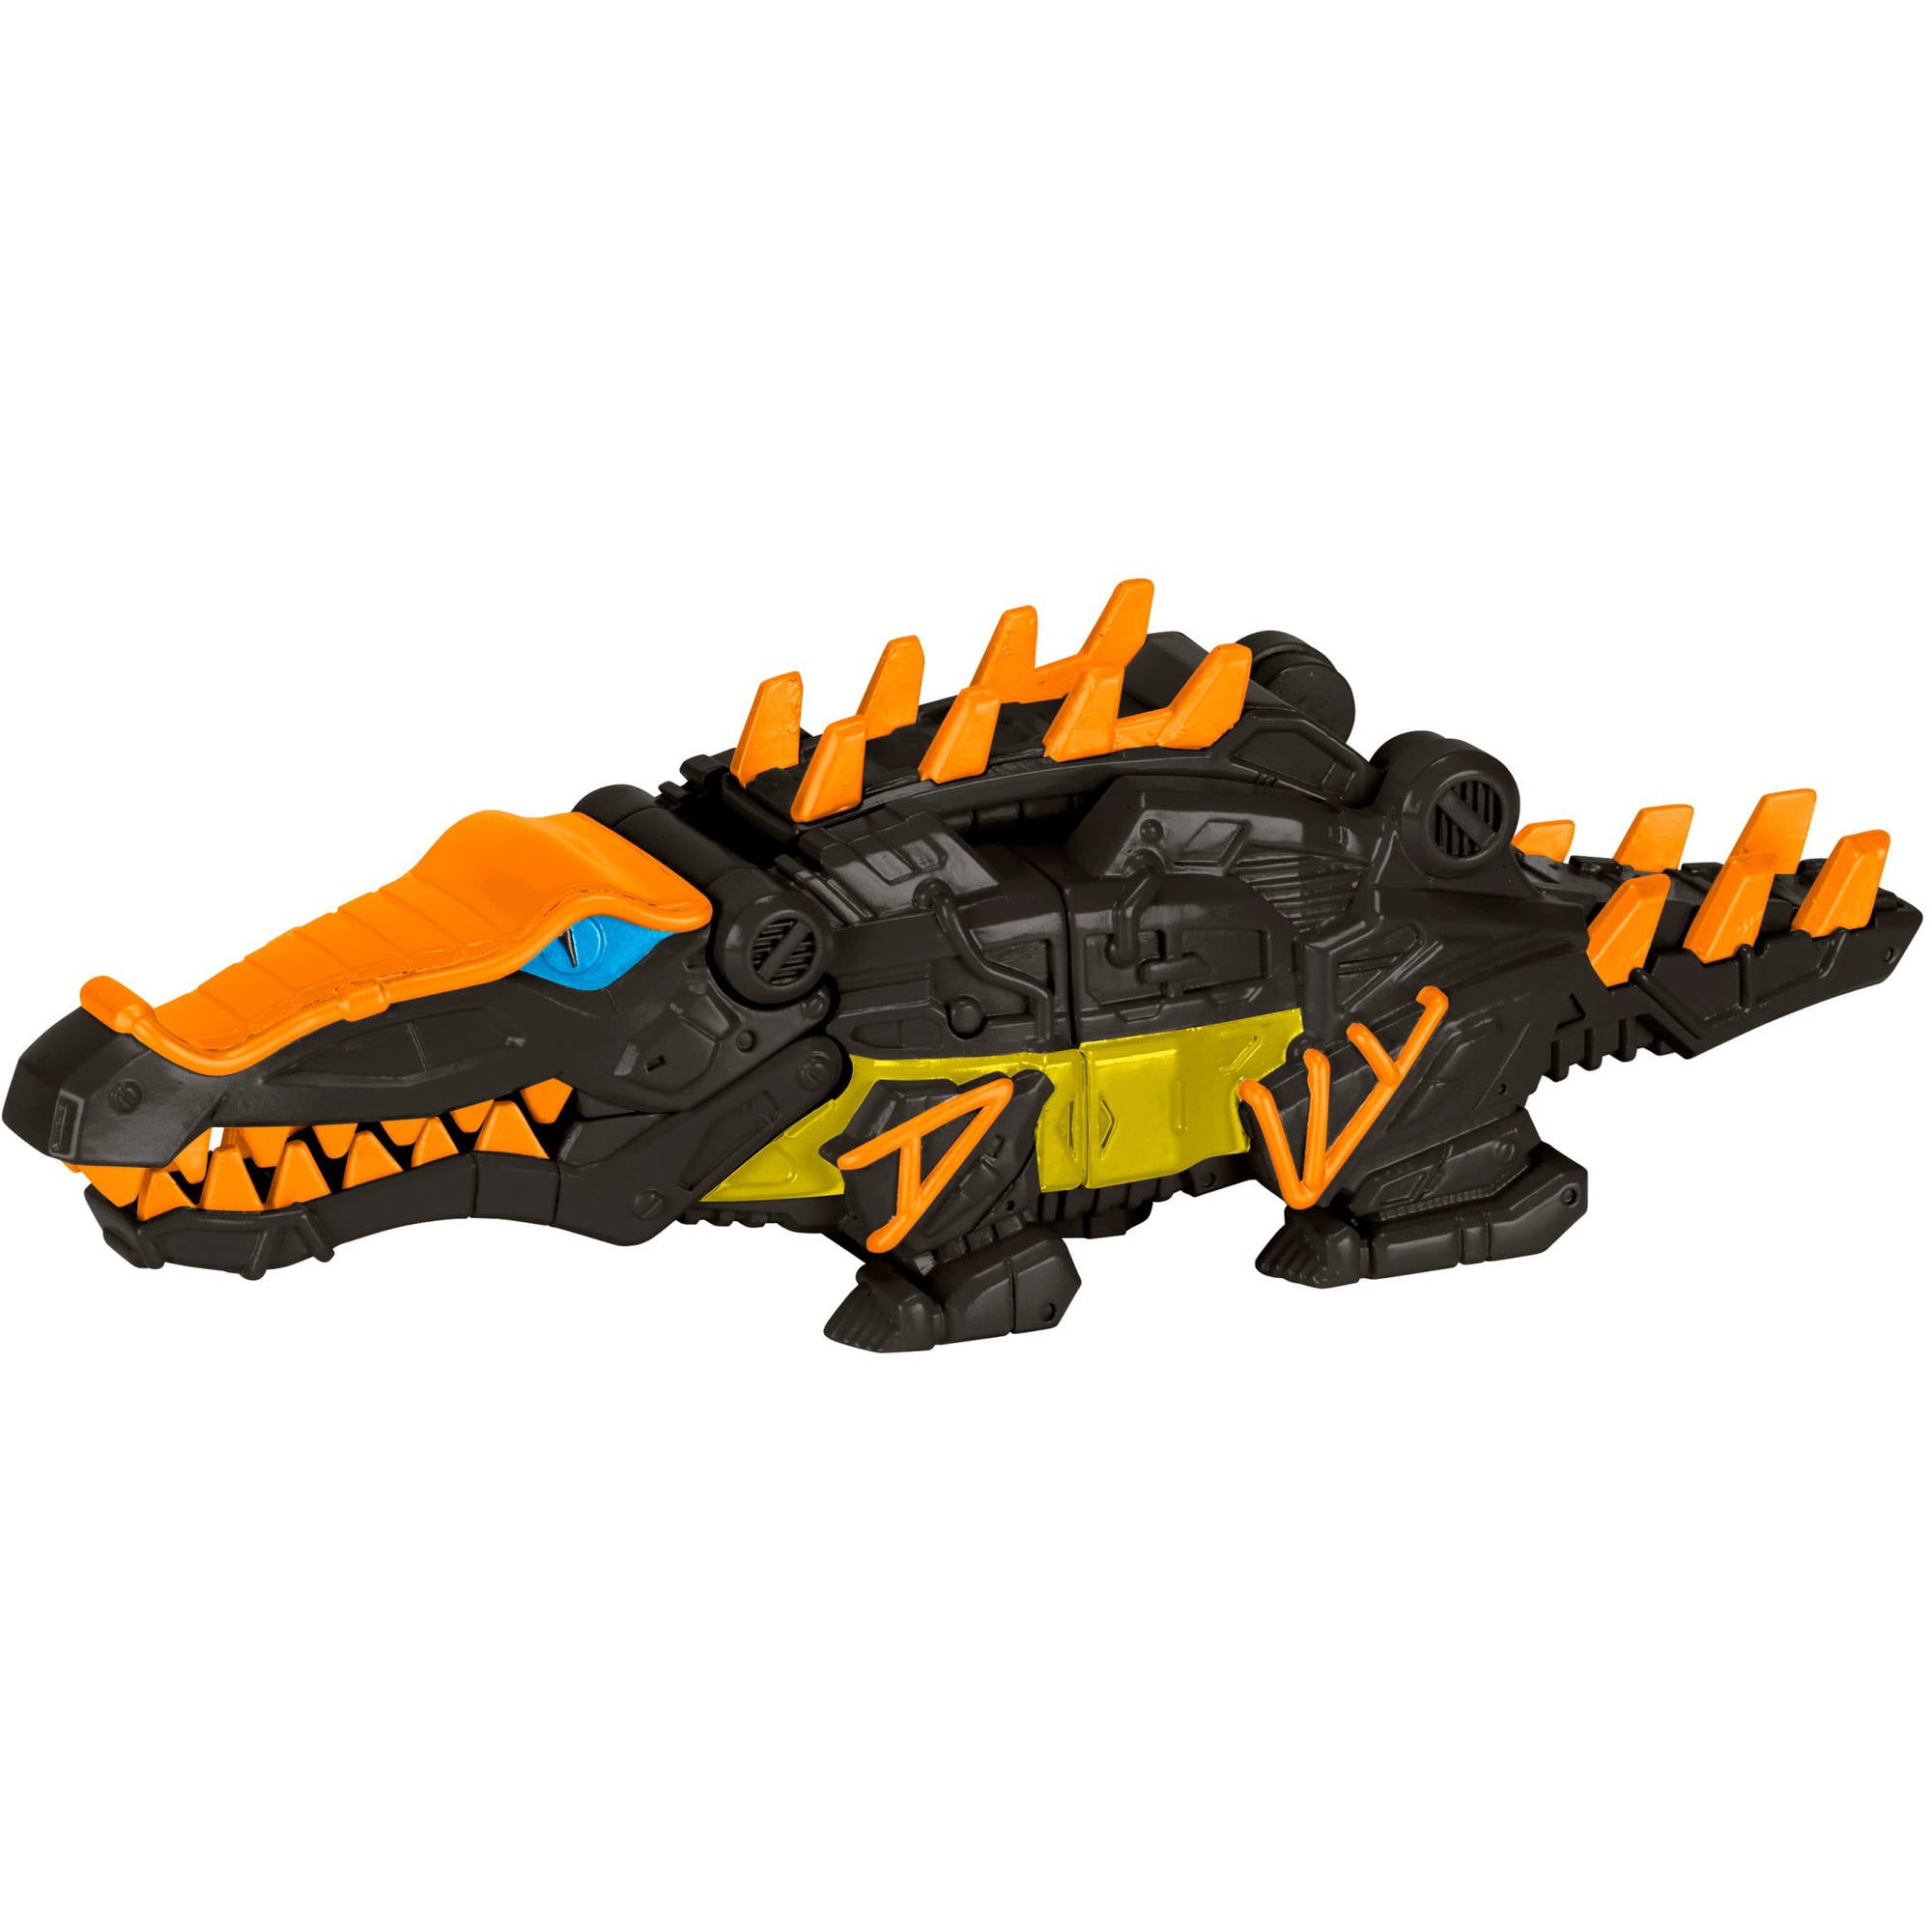 Power Rangers Dino Super Charge Limited Edition Deinosuchus Zord with ...
